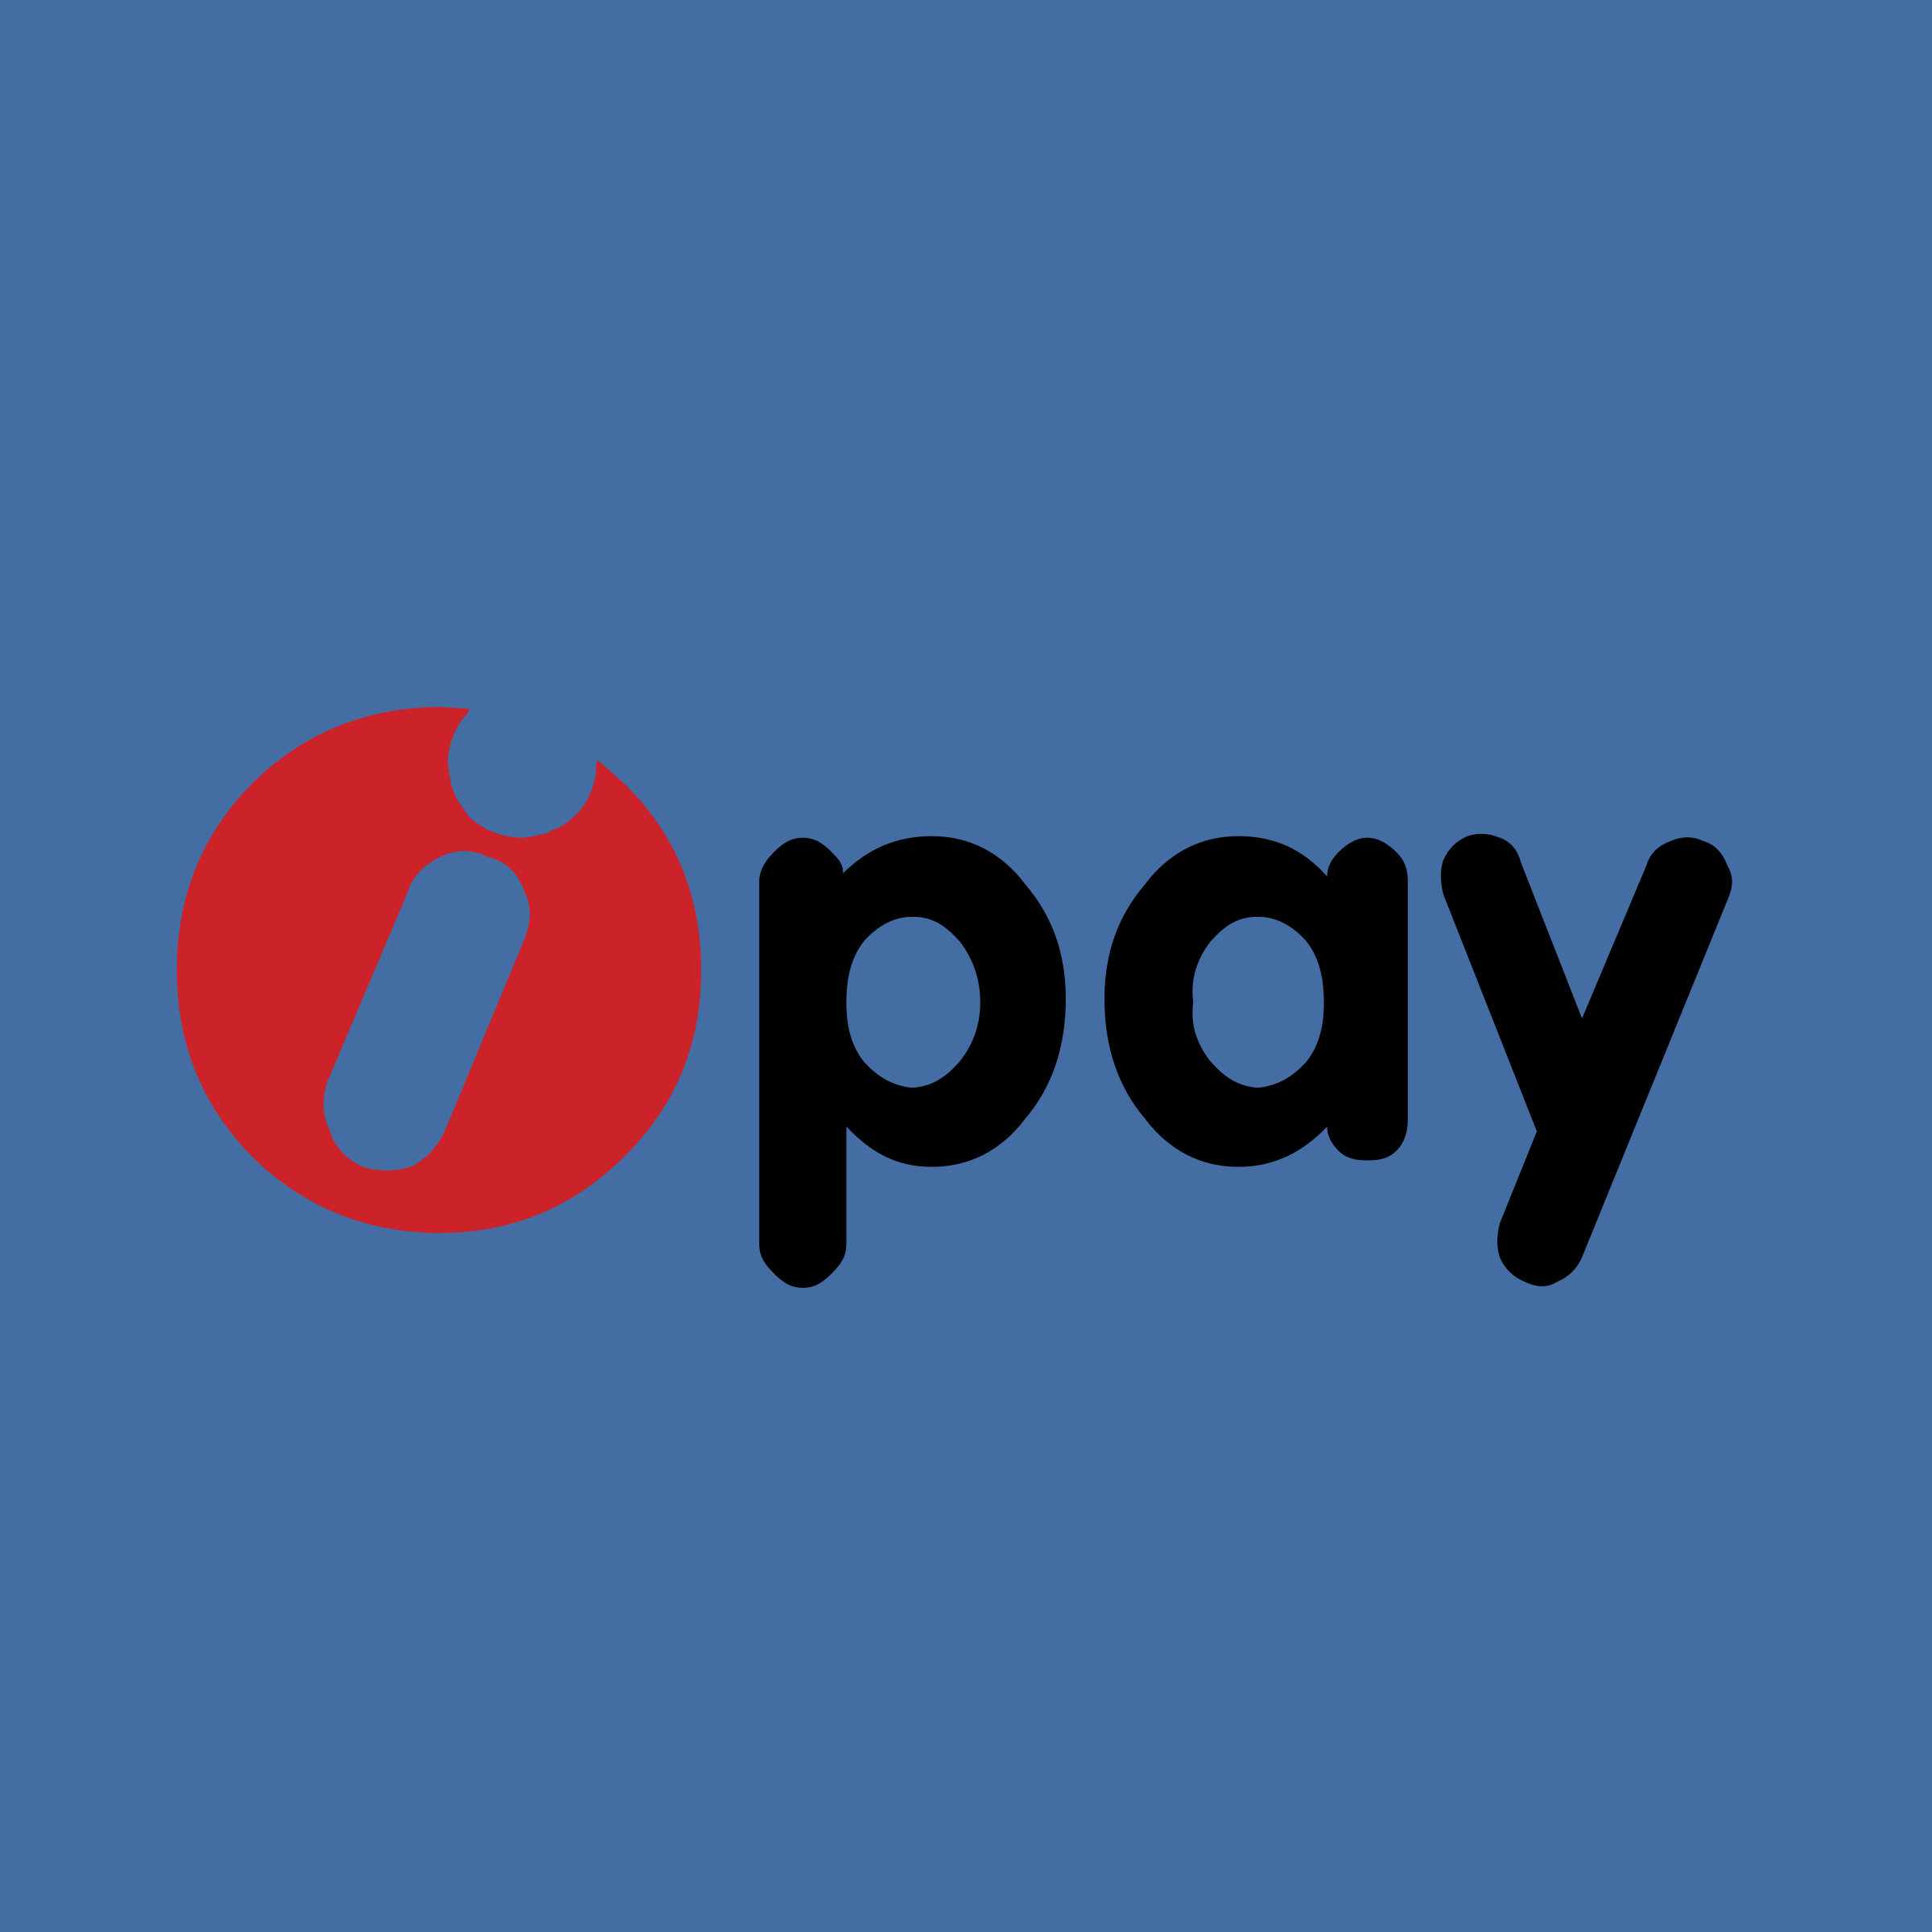 iPay Logo - Ipay Logo PNG Transparent & SVG Vector - Freebie Supply